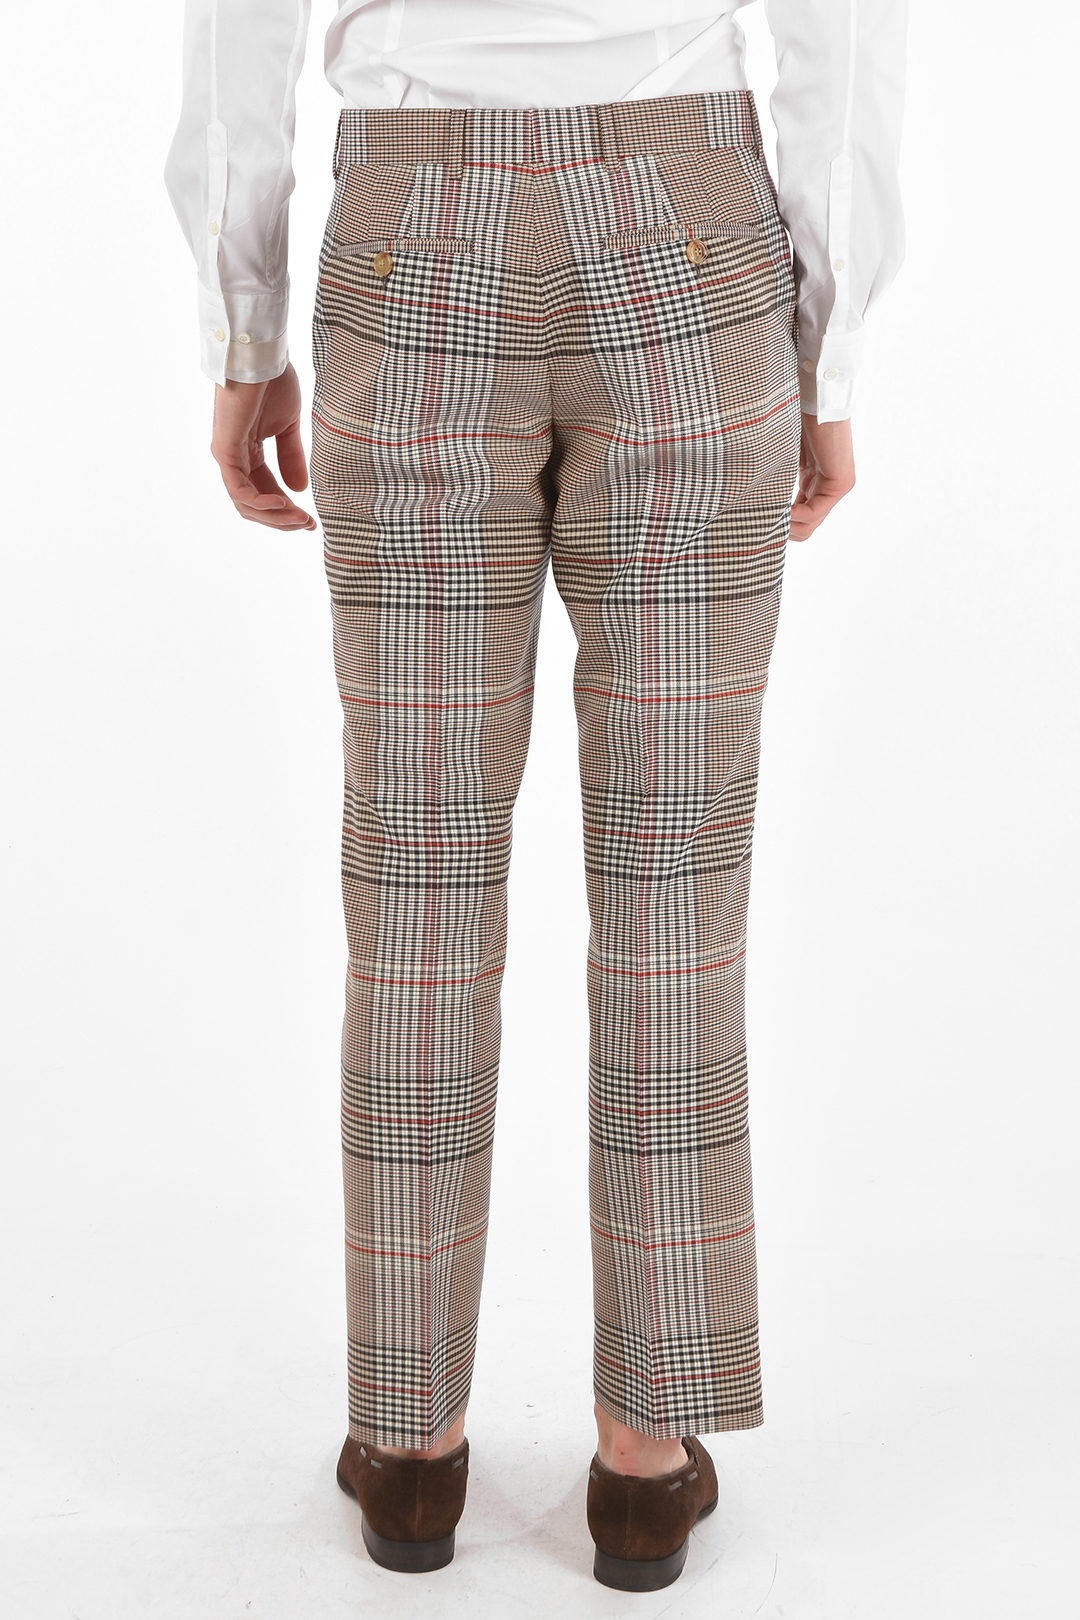 Burberry Check Pajama Pants in Natural for Men  Lyst